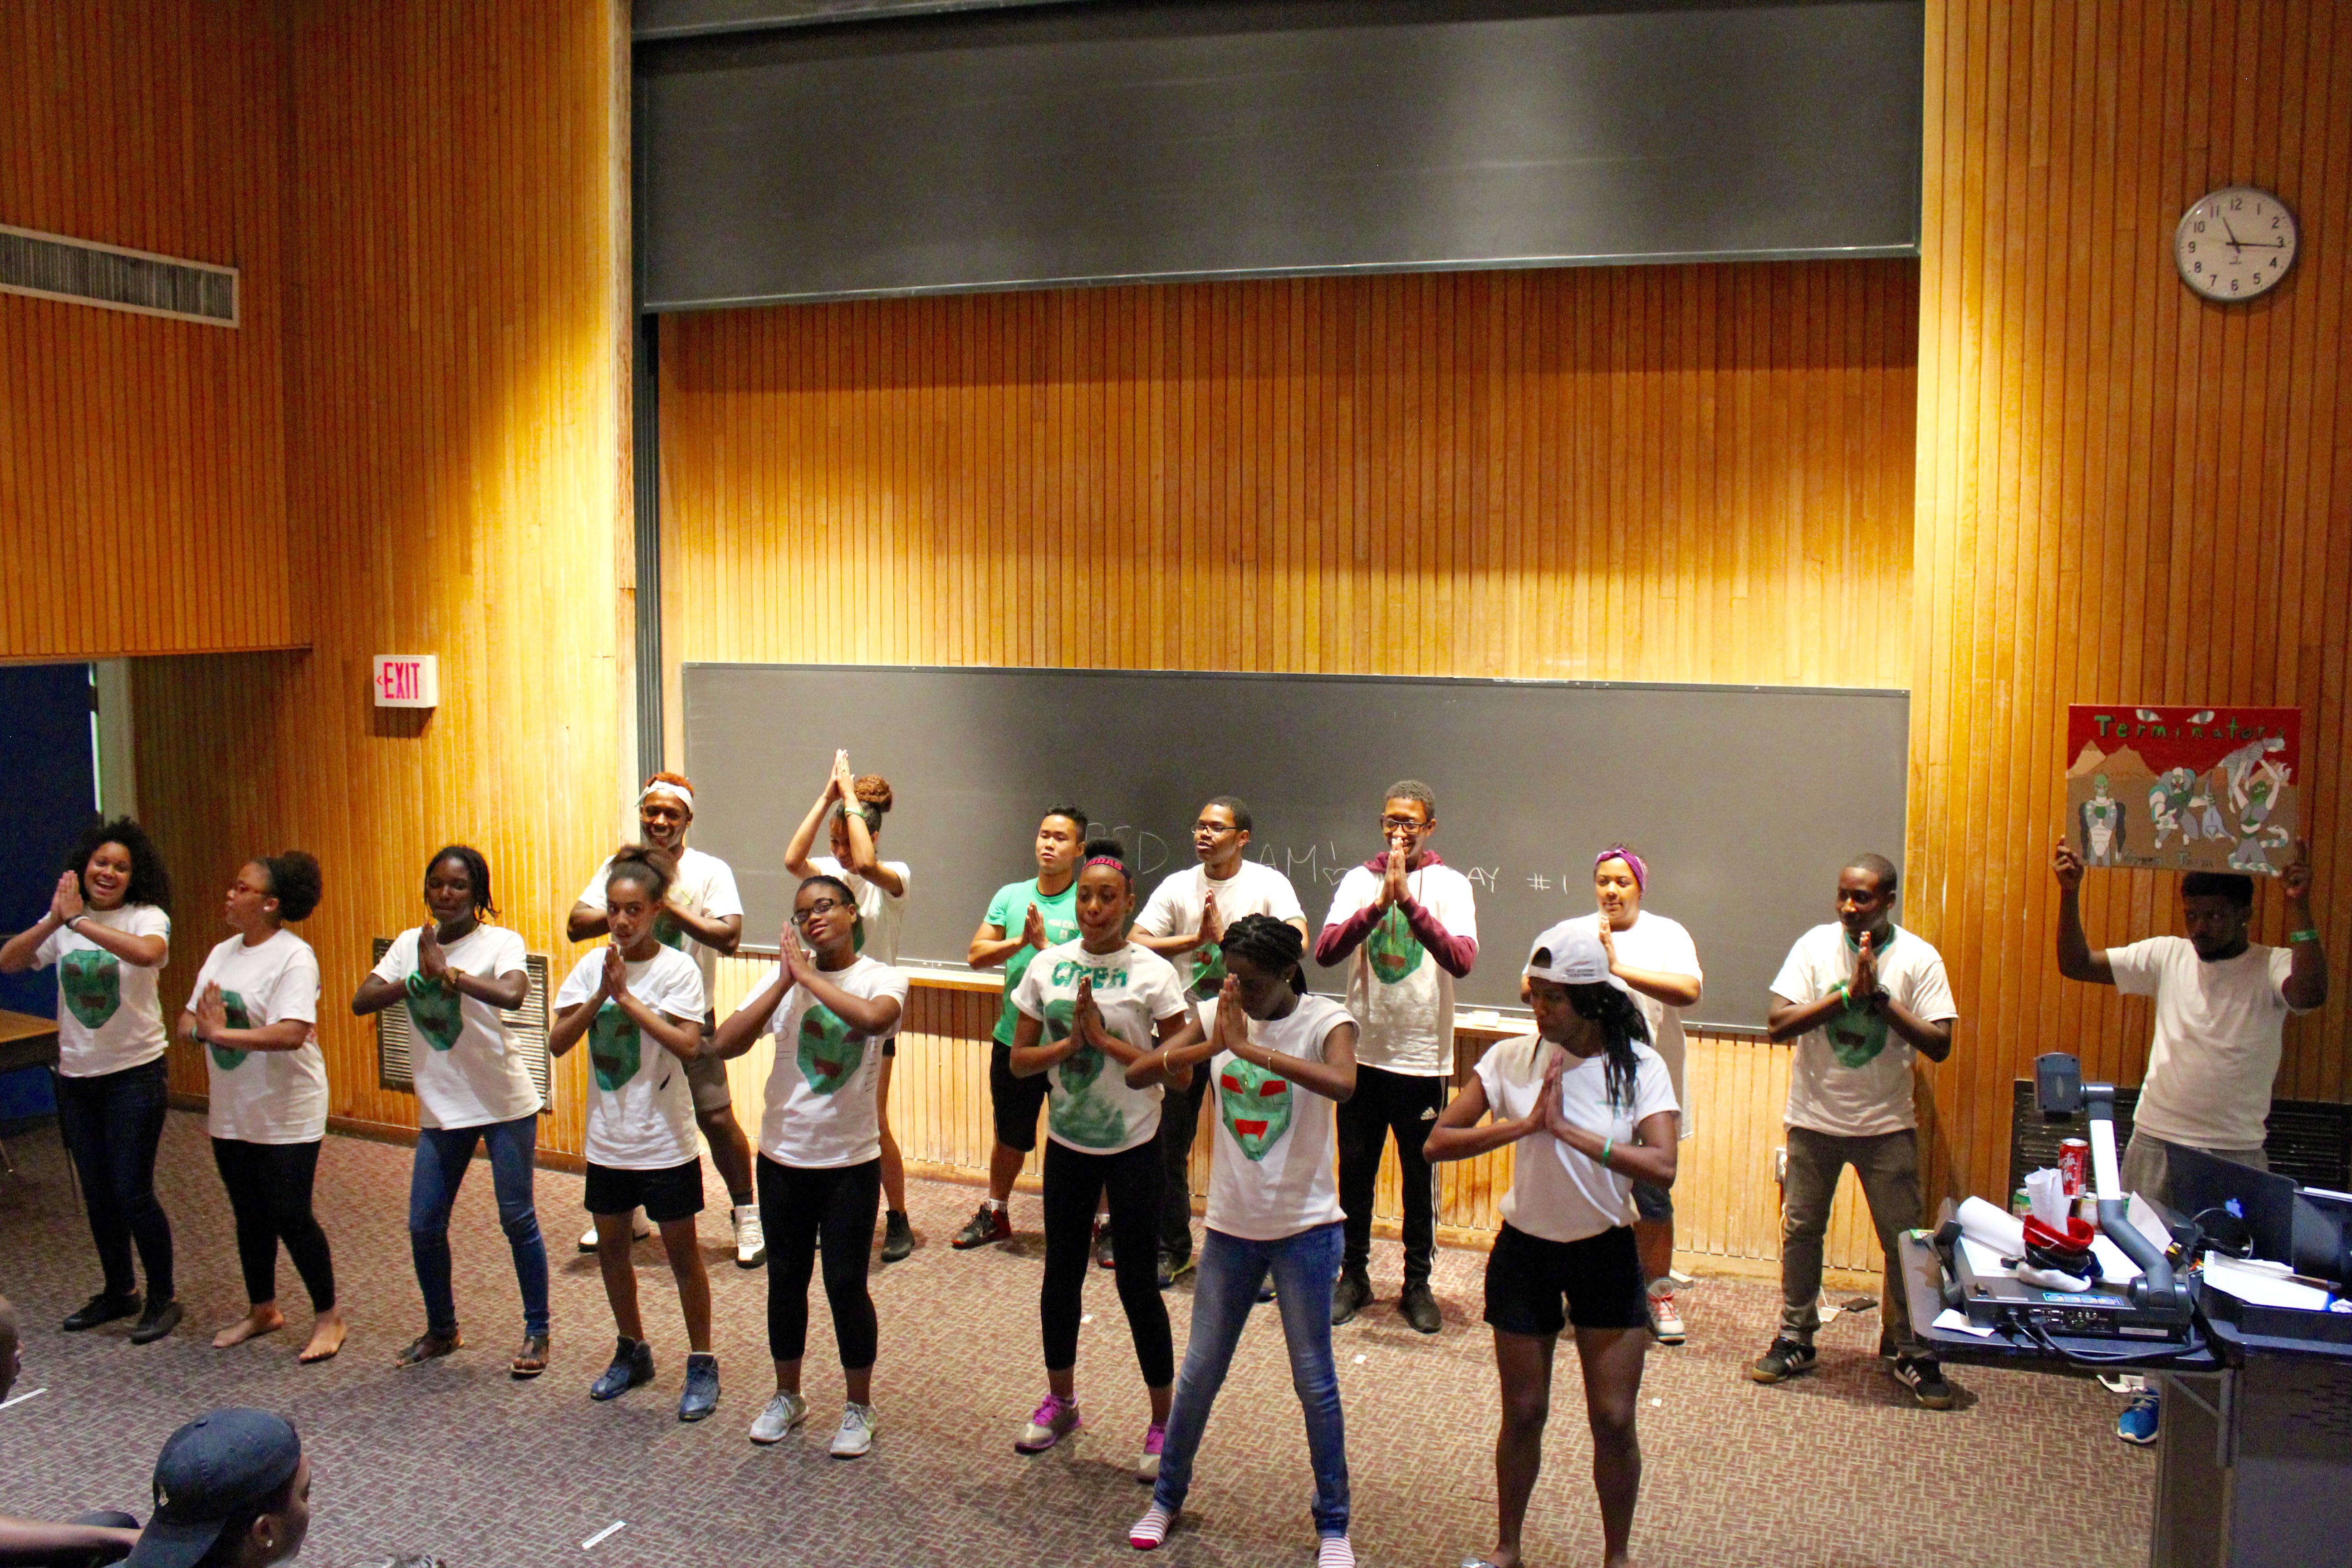 Green team was the largest team of the summer.